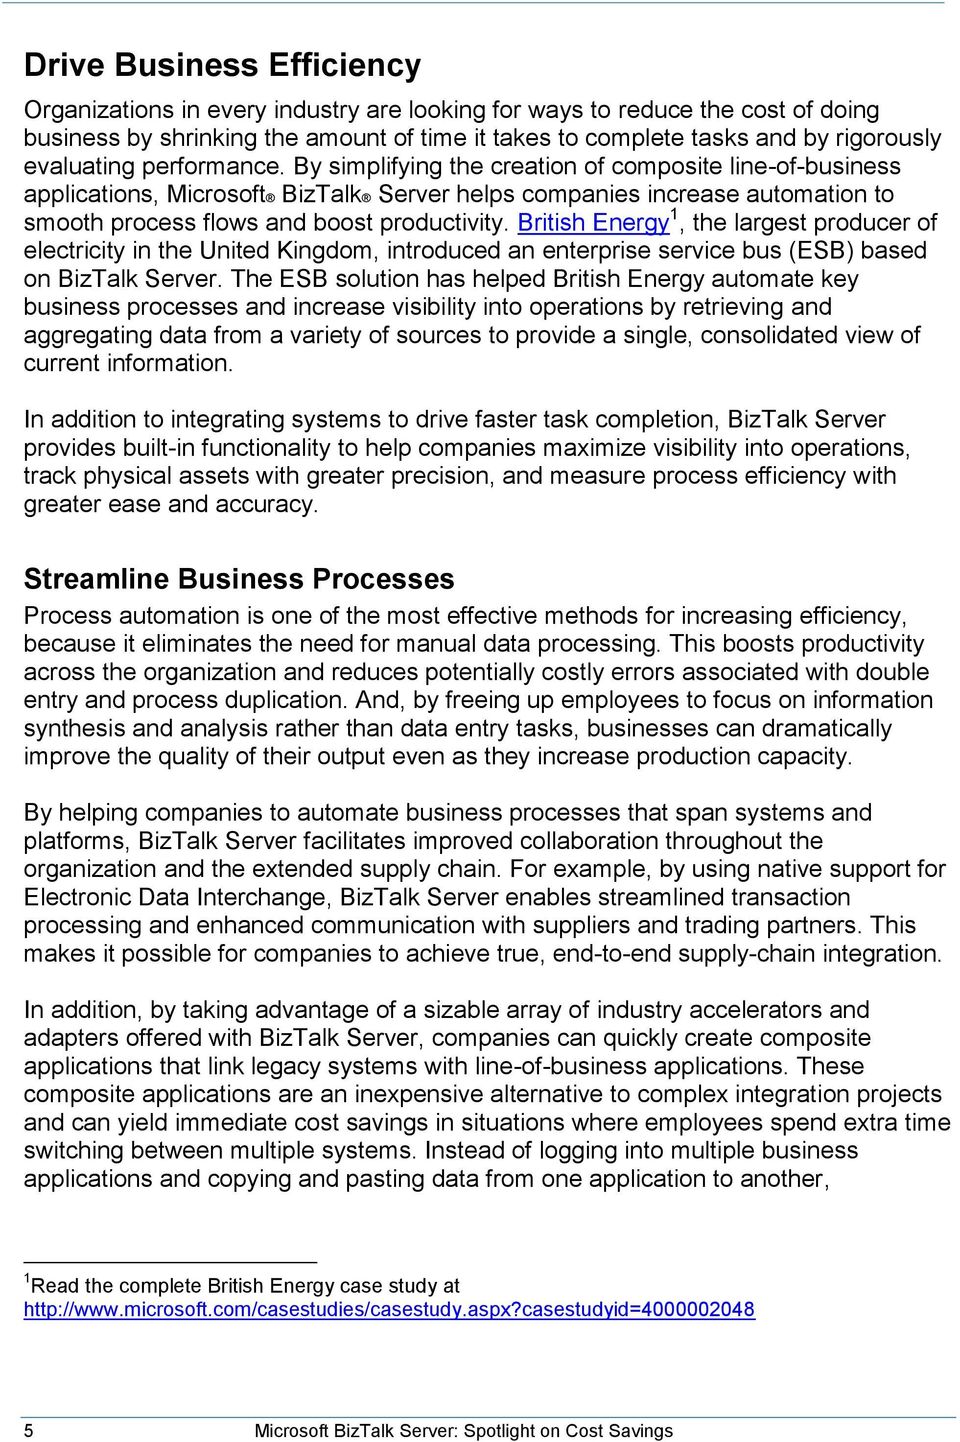 By simplifying the creation of composite line-of-business applications, Microsoft BizTalk Server helps companies increase automation to smooth process flows and boost productivity.